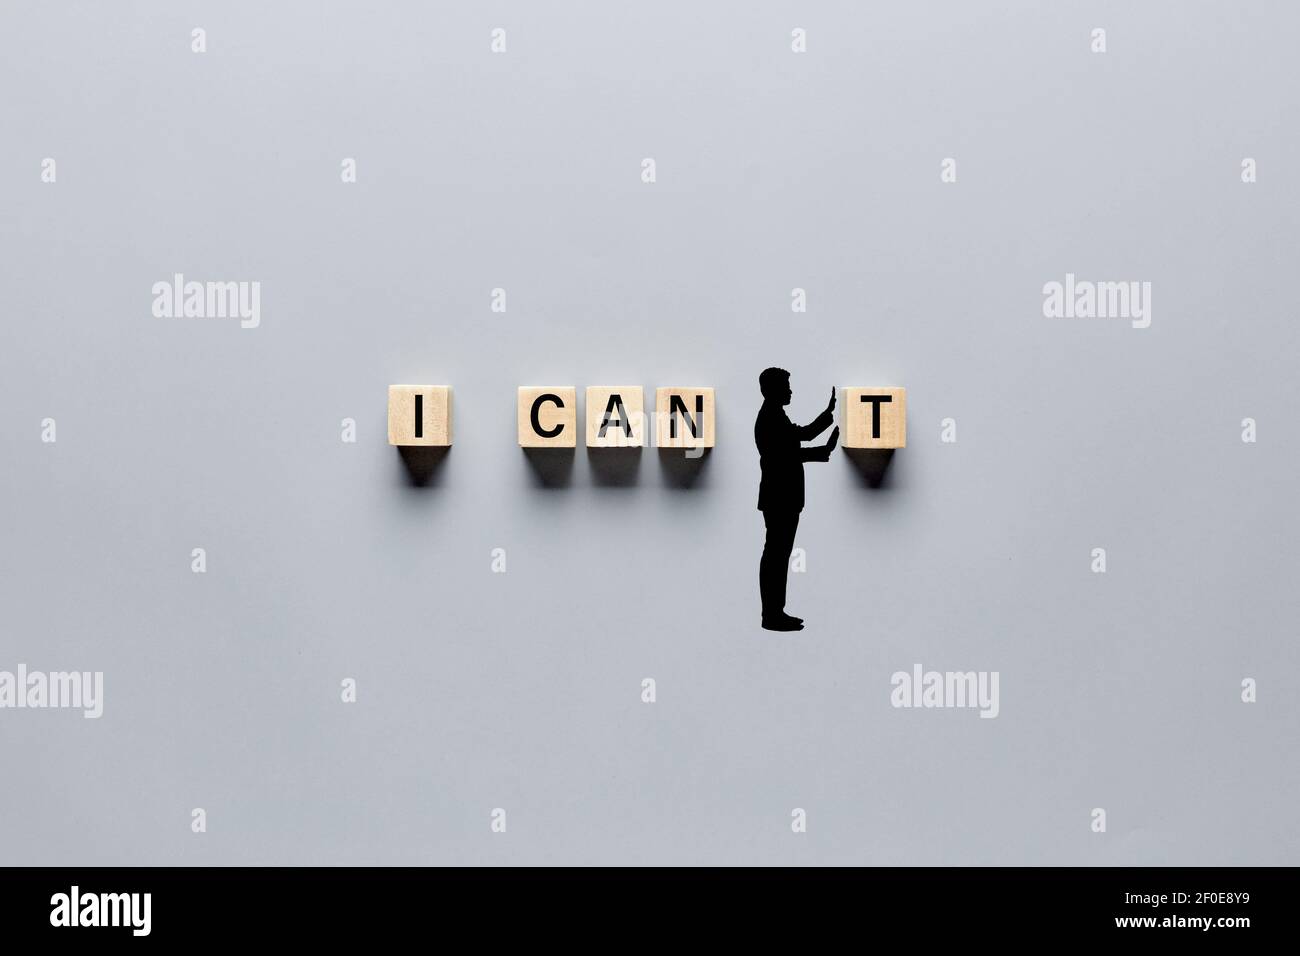 Silhouette of a hand drawn man changing the word I can't into I can by pushing away the letter. Aspiration, positivity, belief and motivation concept Stock Photo